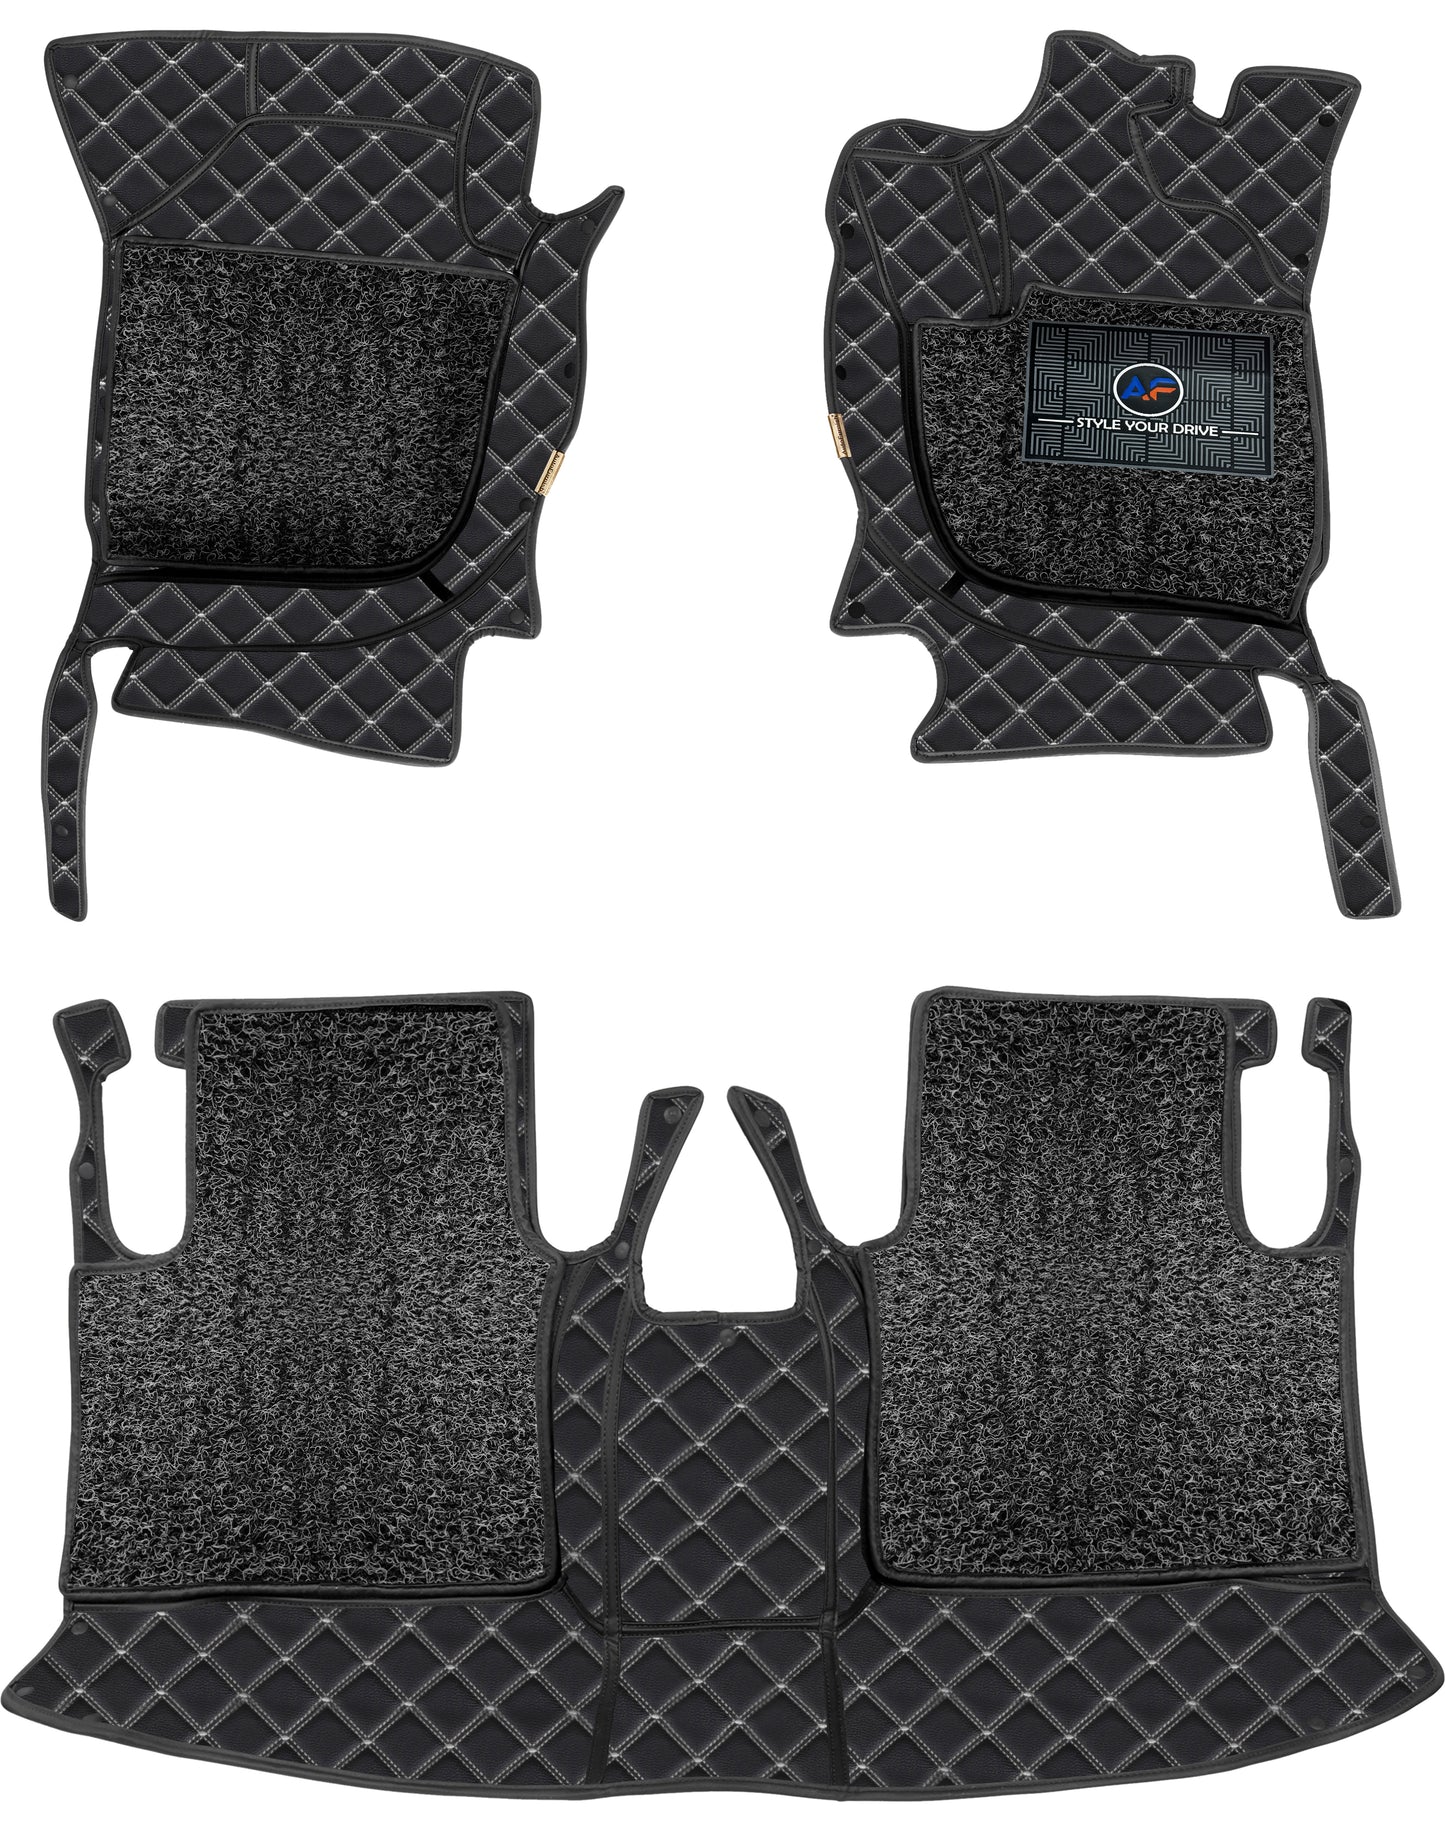 Toyota Innova Hycross (7 Seater) 2023-7D Luxury Car Mat, All Weather Proof, Anti-Skid, 100% Waterproof & Odorless with Unique Diamond Fish Design (24mm Luxury PU Leather, 2 Rows)